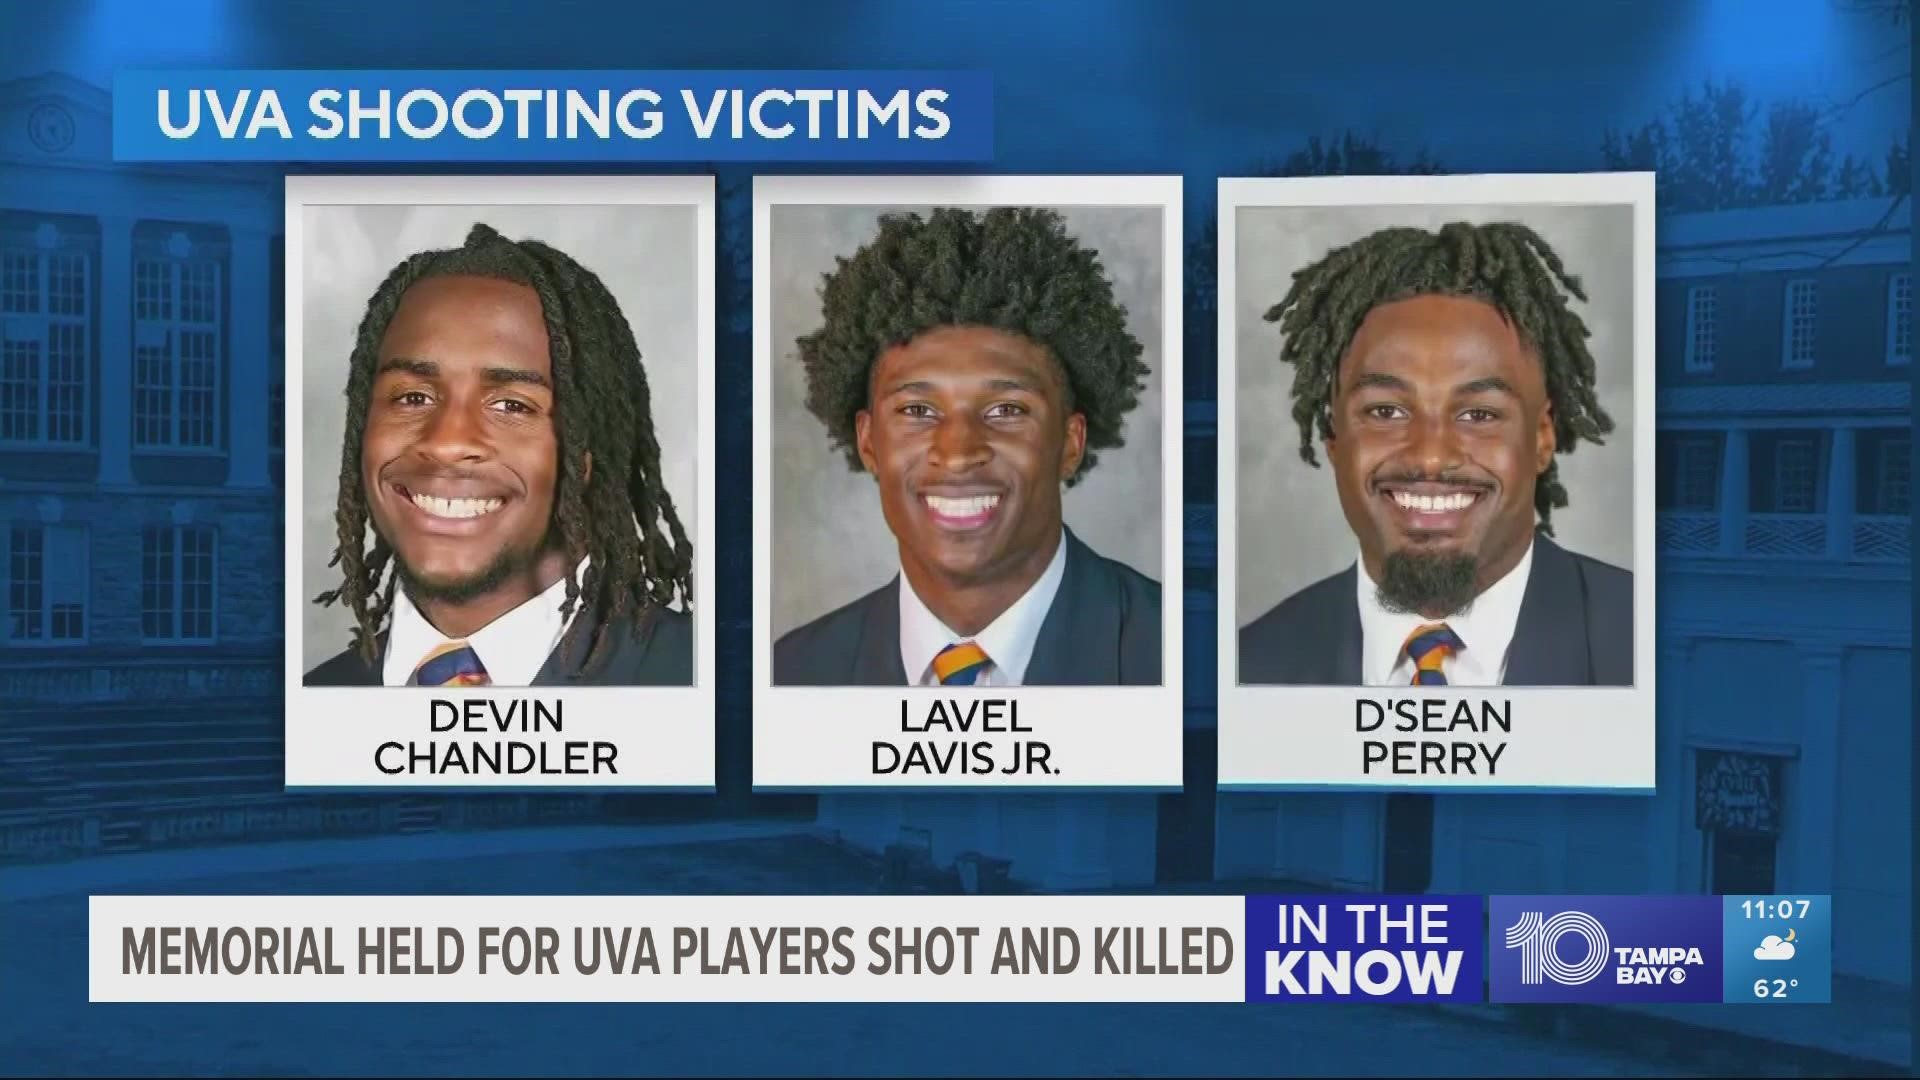 Lavel Davis Jr., D’Sean Perry and Devin Chandler were remembered during a memorial service in Charlottesville.